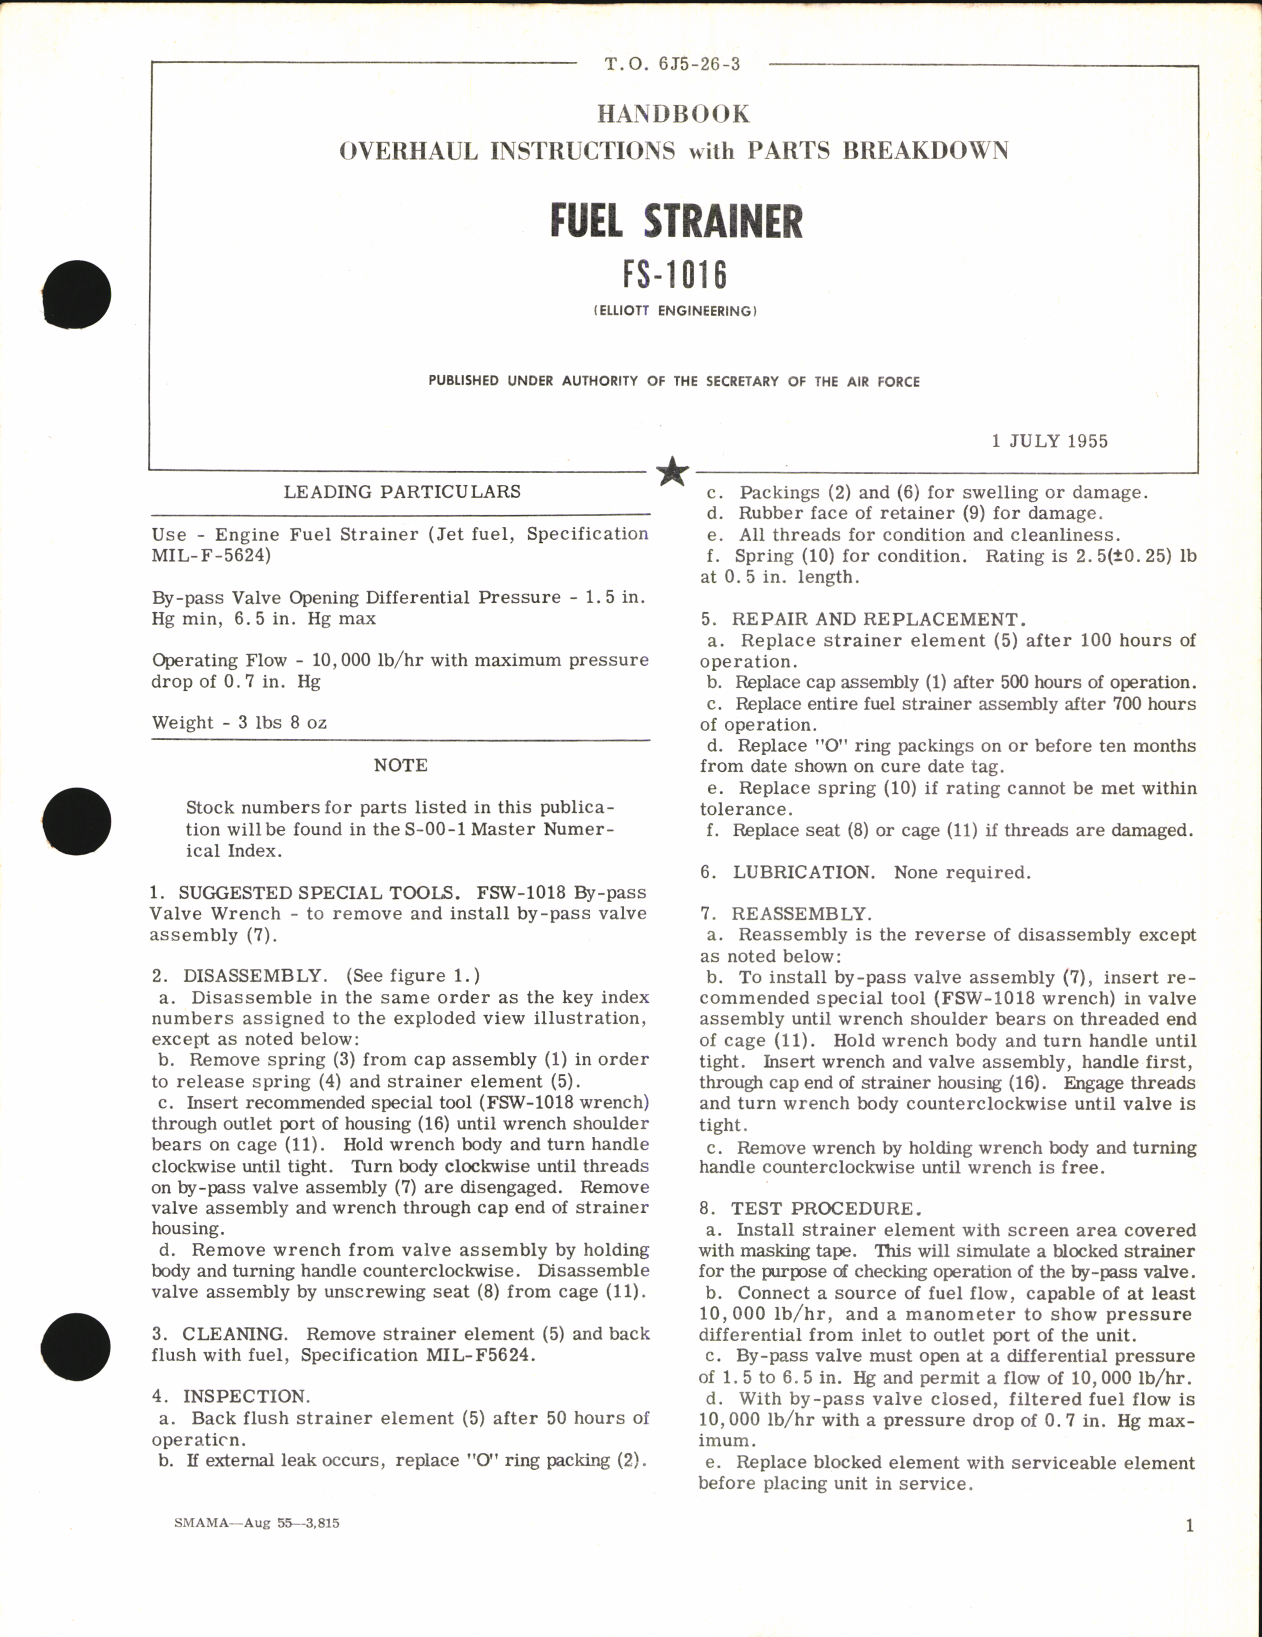 Sample page 1 from AirCorps Library document: Overhaul Instructions with Parts Breakdown for Fuel Strainer FS-1016